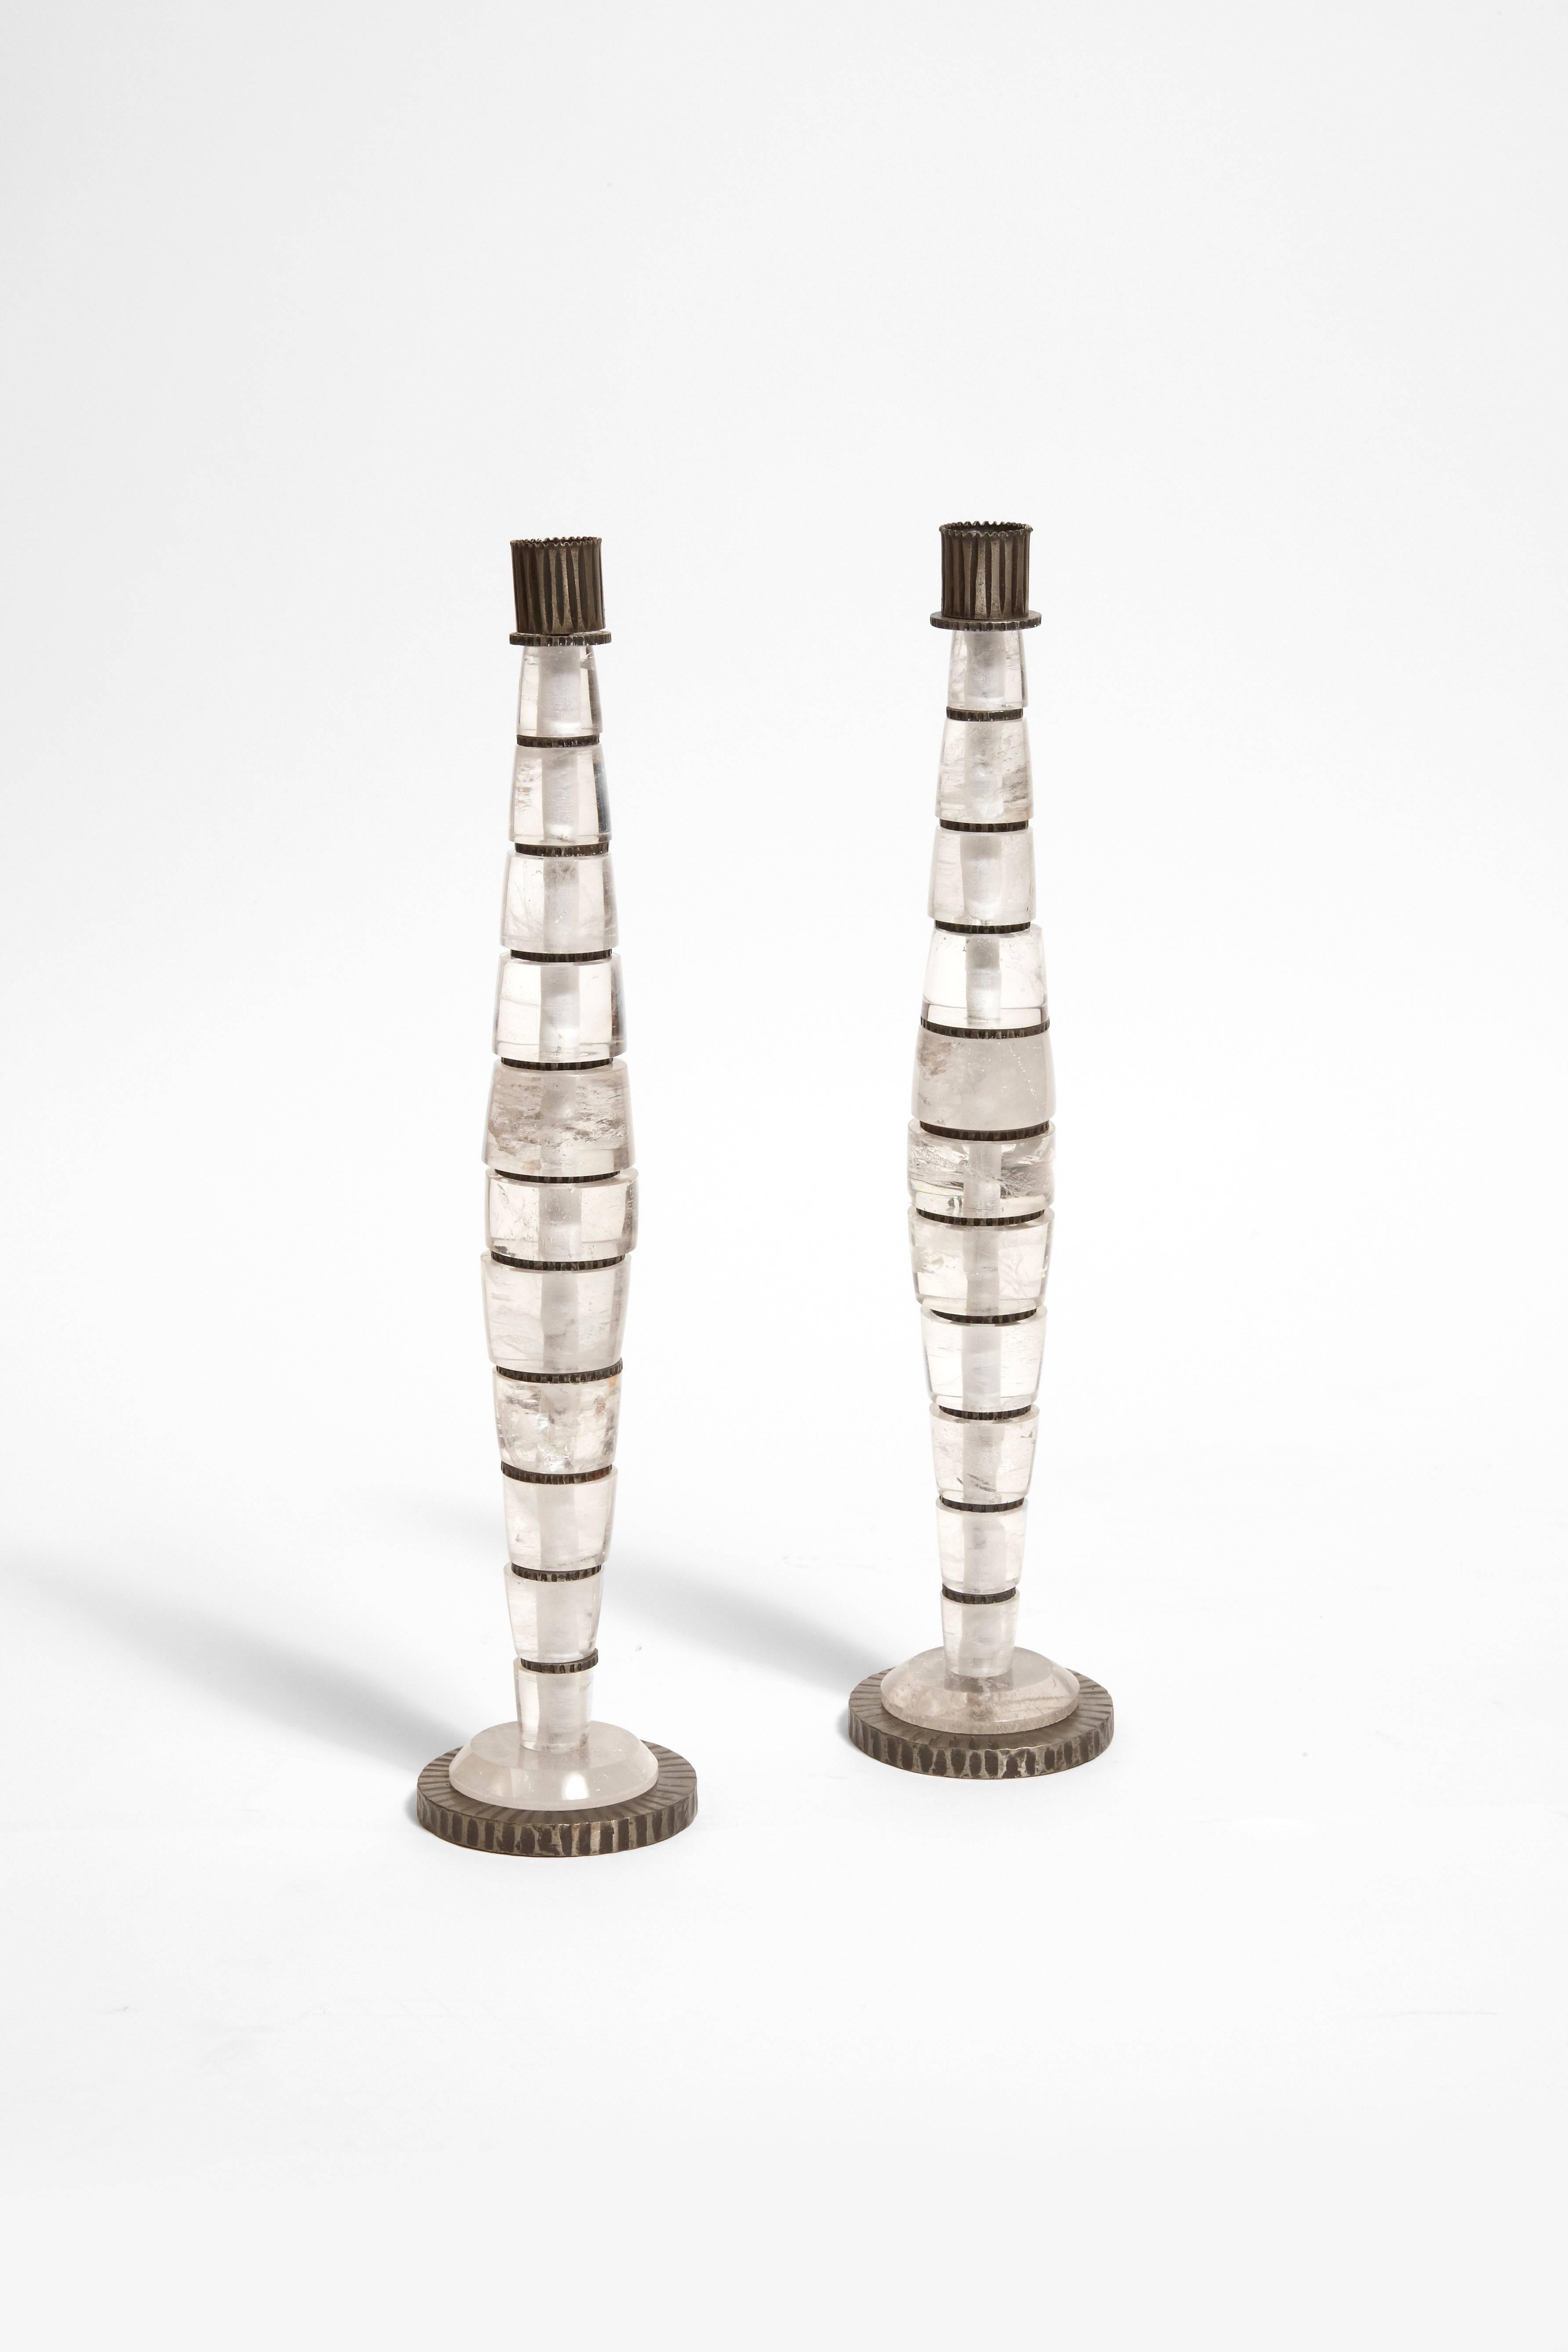 A Pair of Round Candlestick, 2003
Twelve elements in rock crystal and spacers in hammered wrought iron